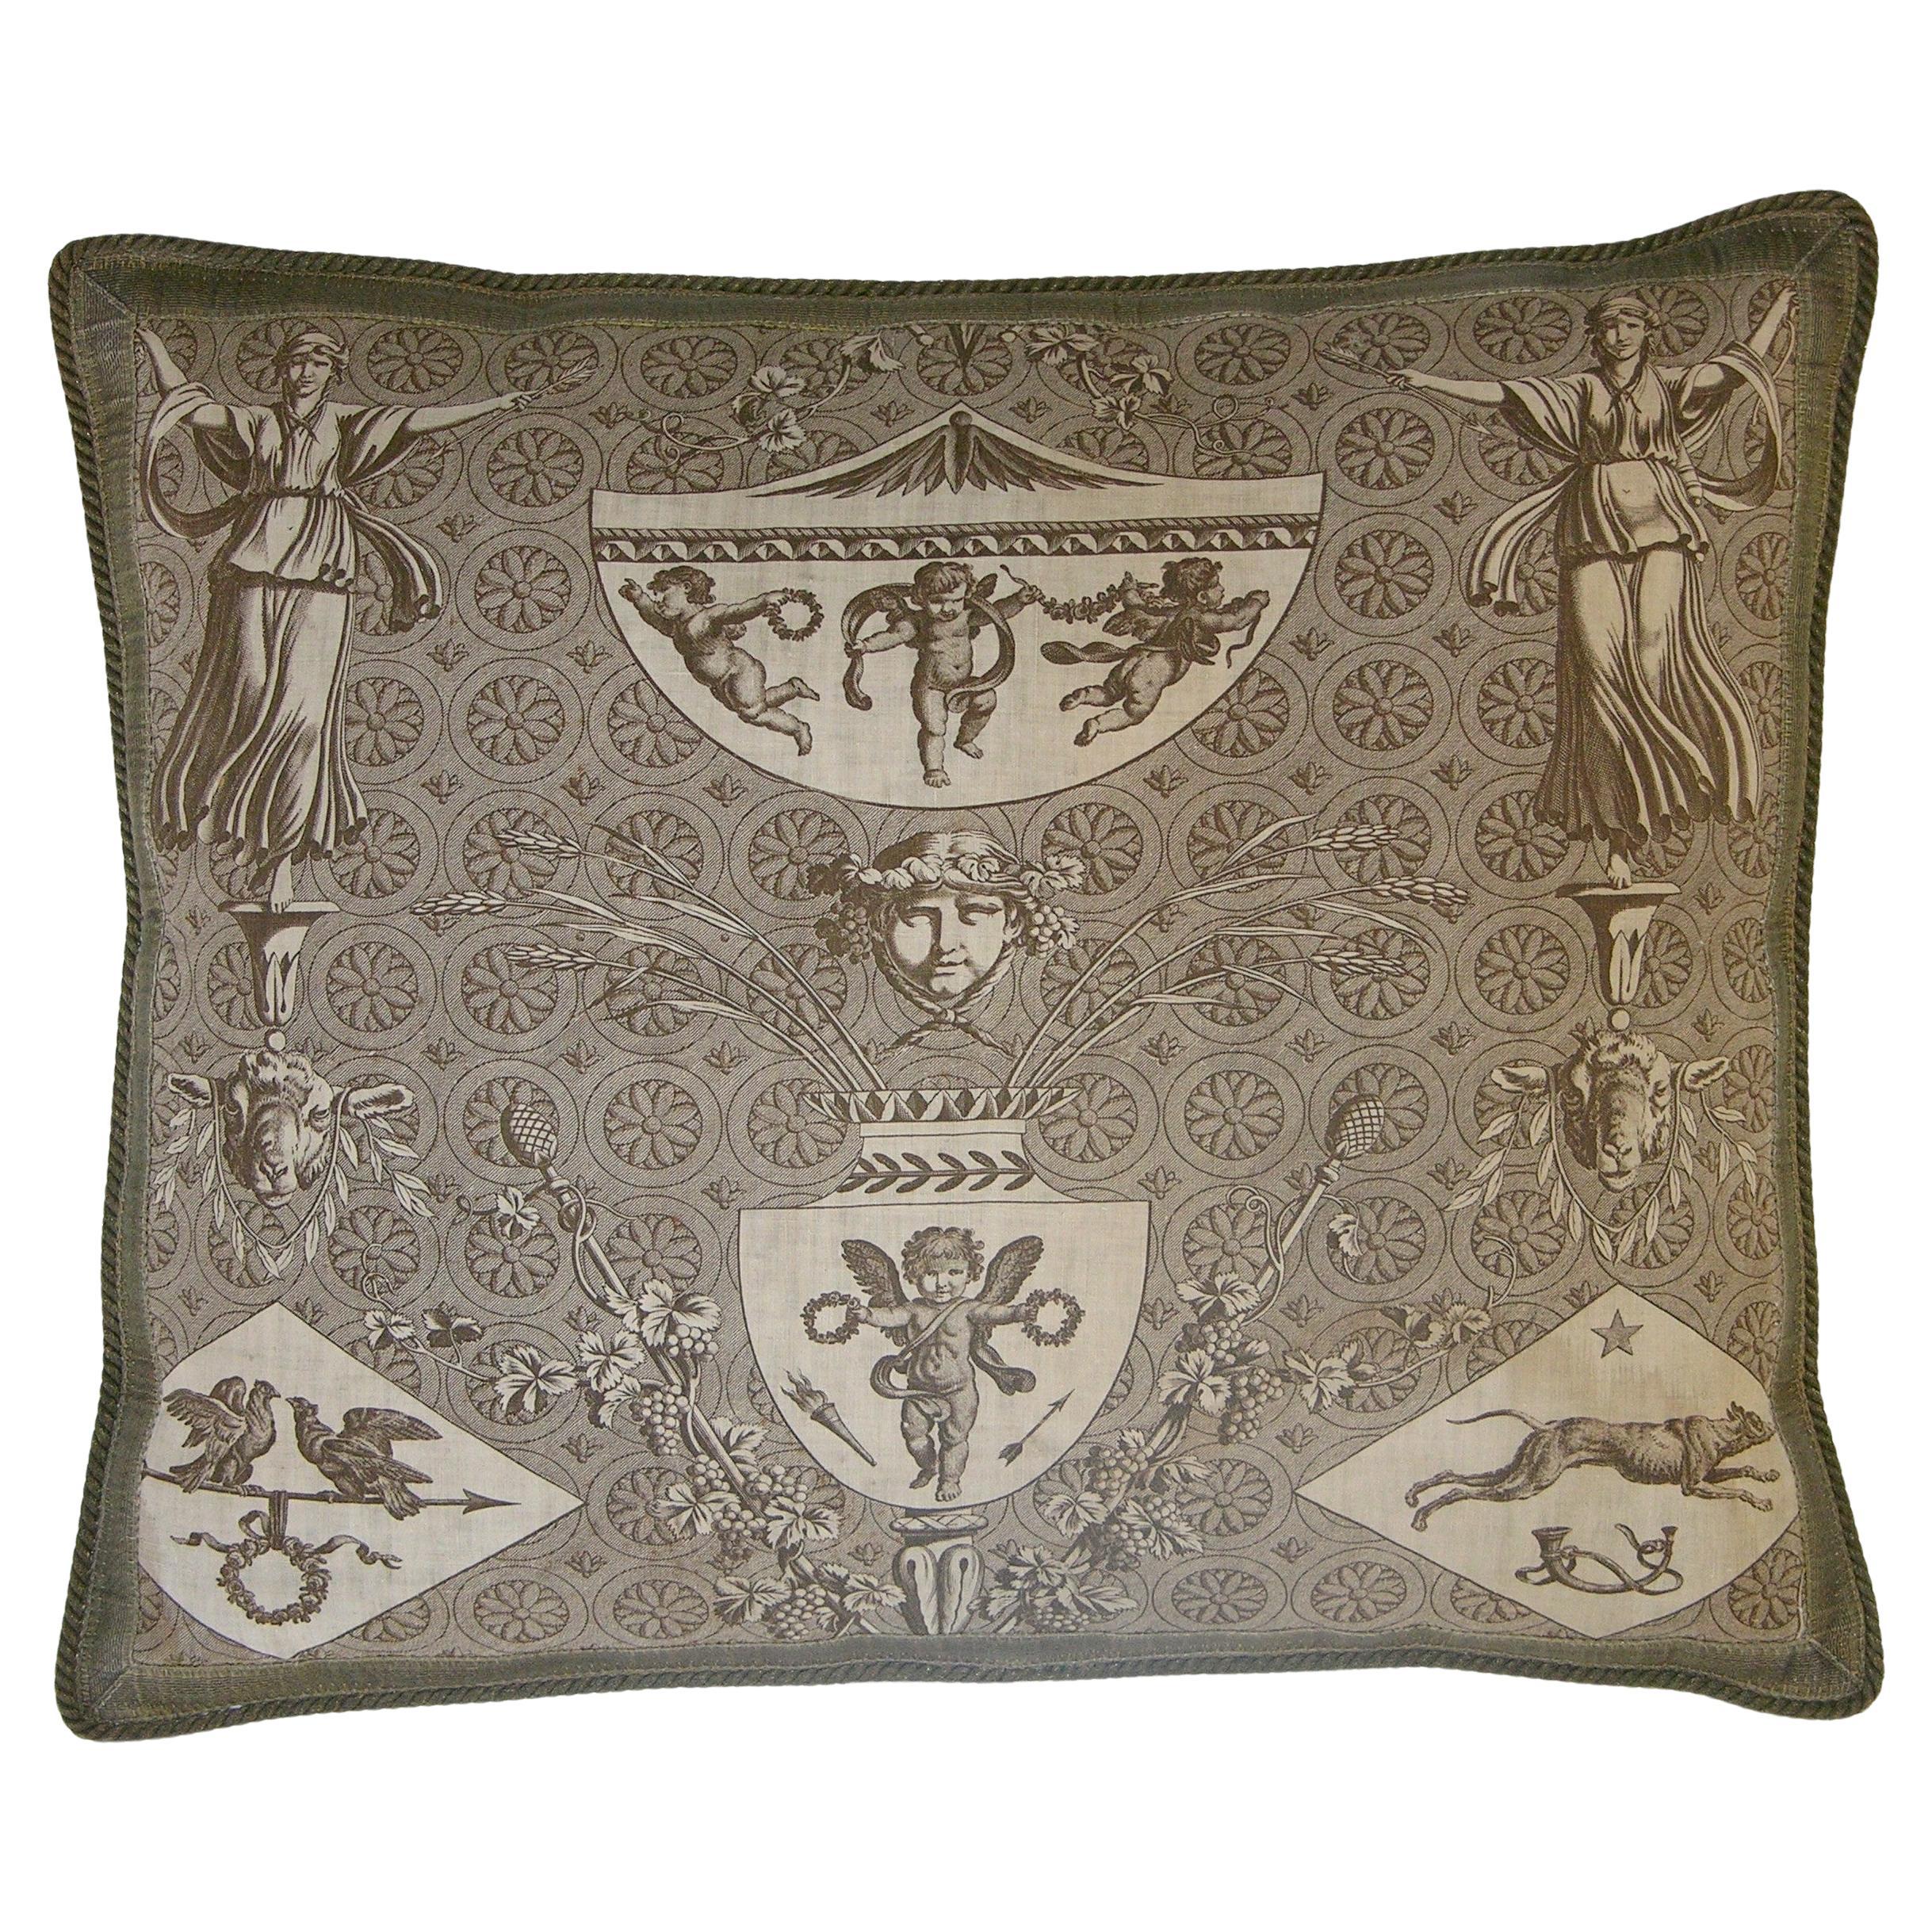 Circa 1760-1843 Antique French Tapestry Pillow